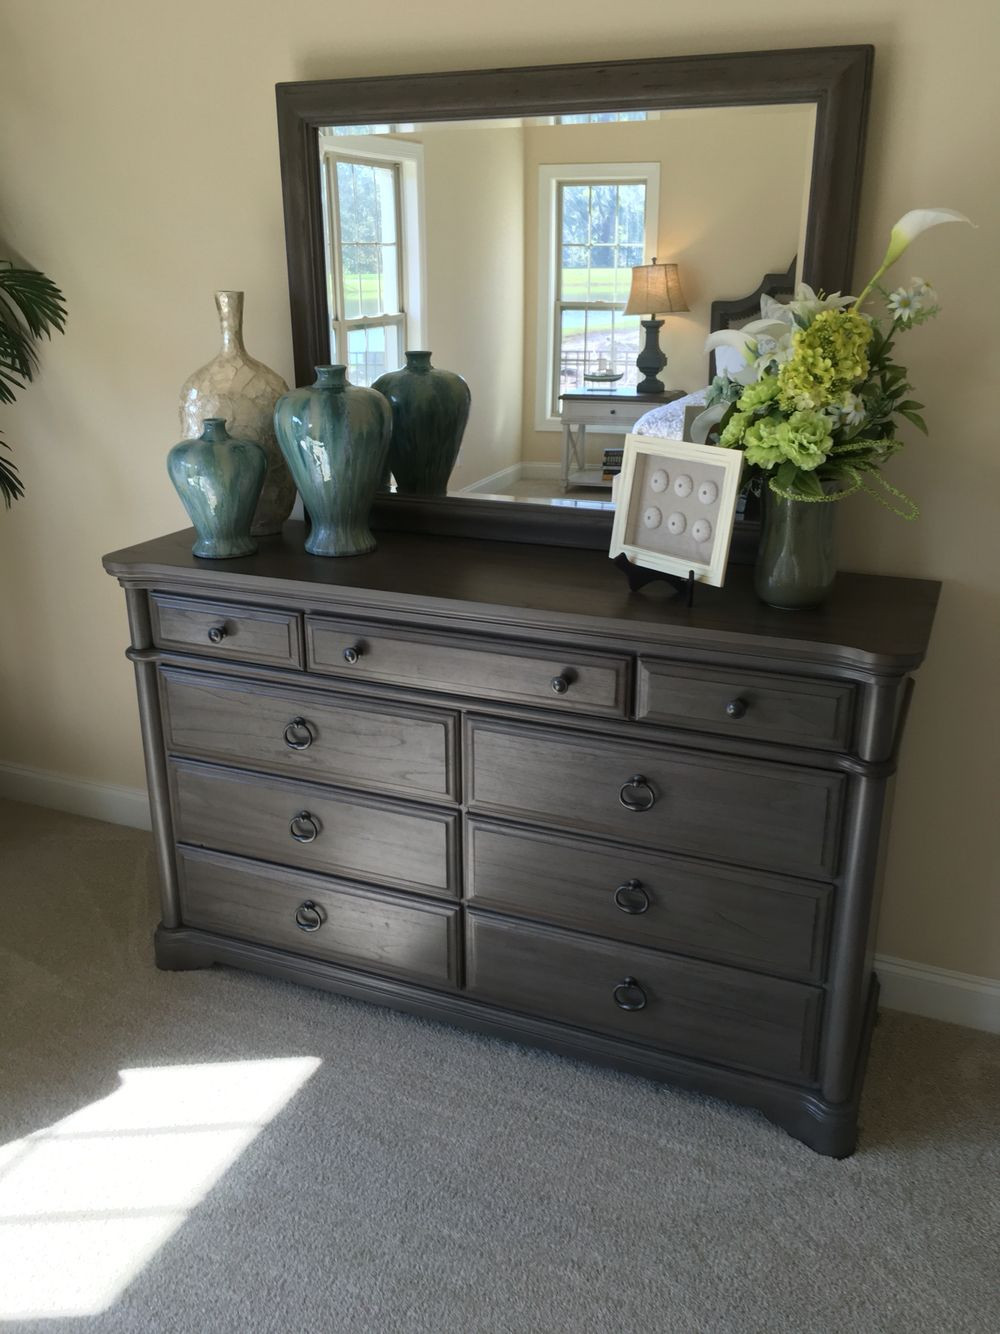 Dresser Ideas For Small Bedroom
 How to stage a dresser in 2019